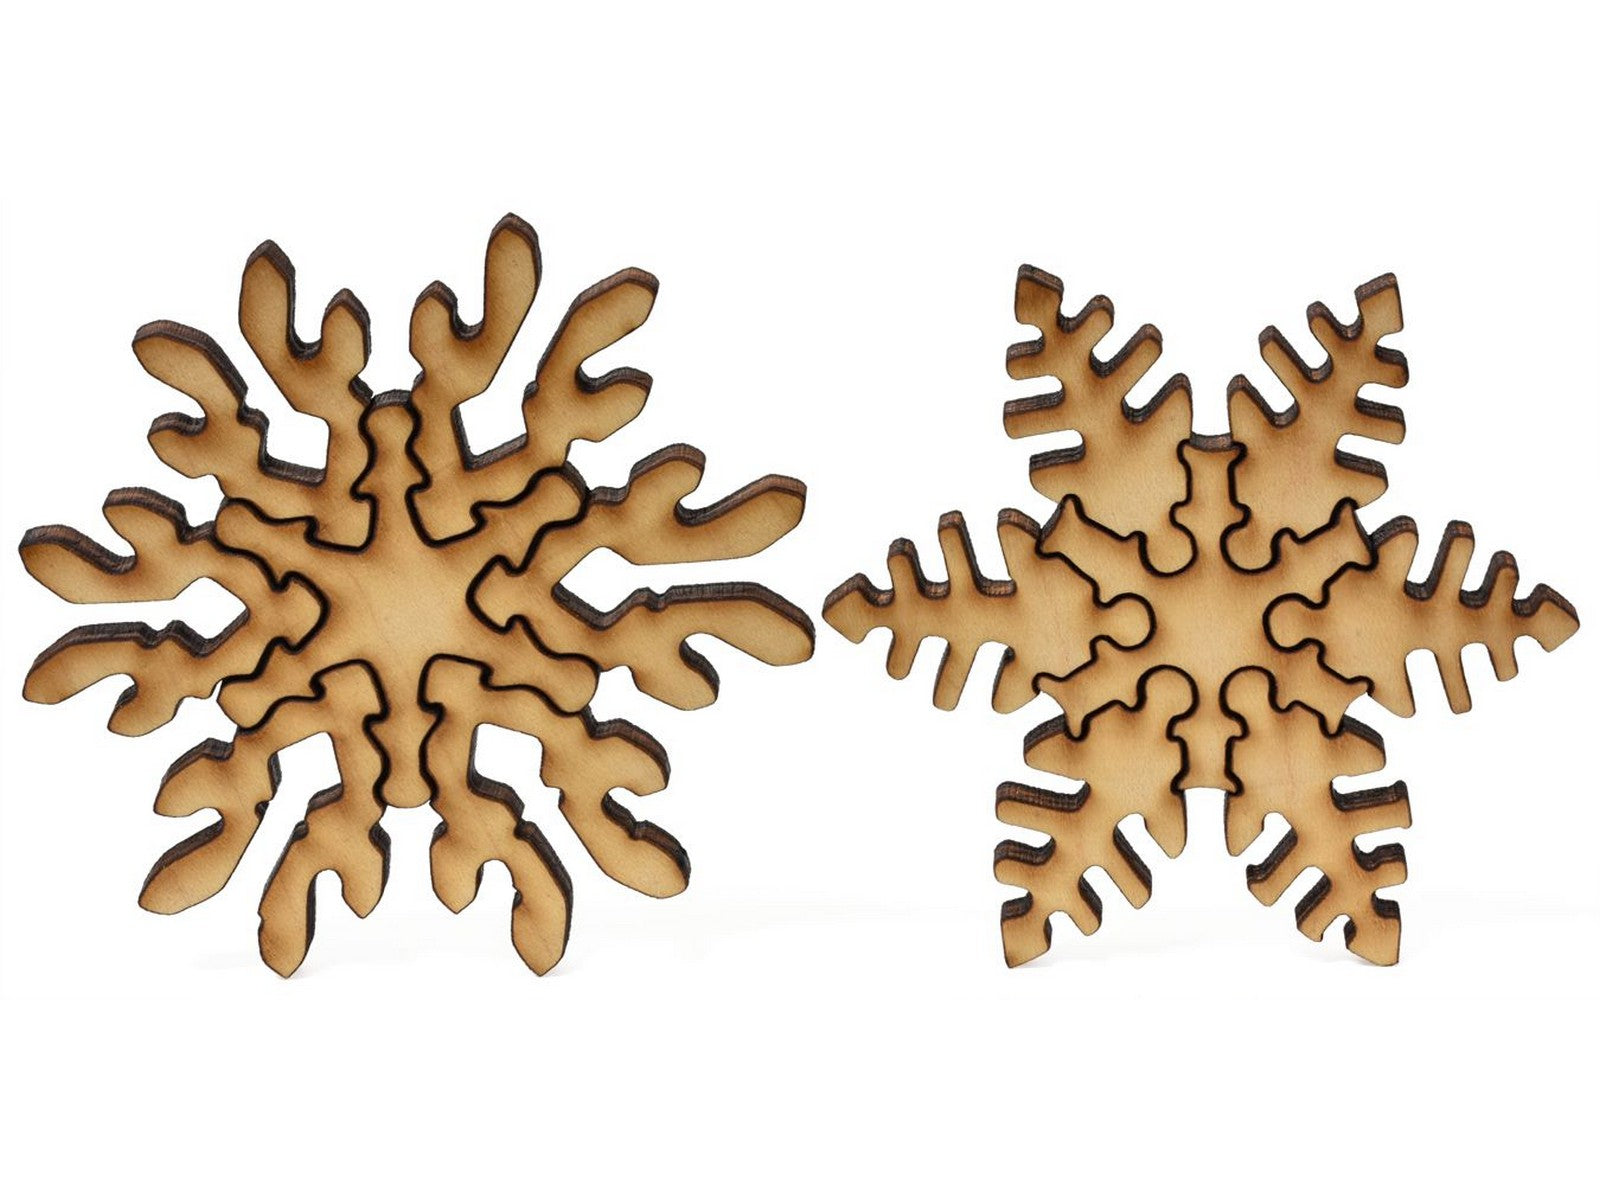 Second image for A closeup of pieces showing two fancy multi-piece snowflakes.